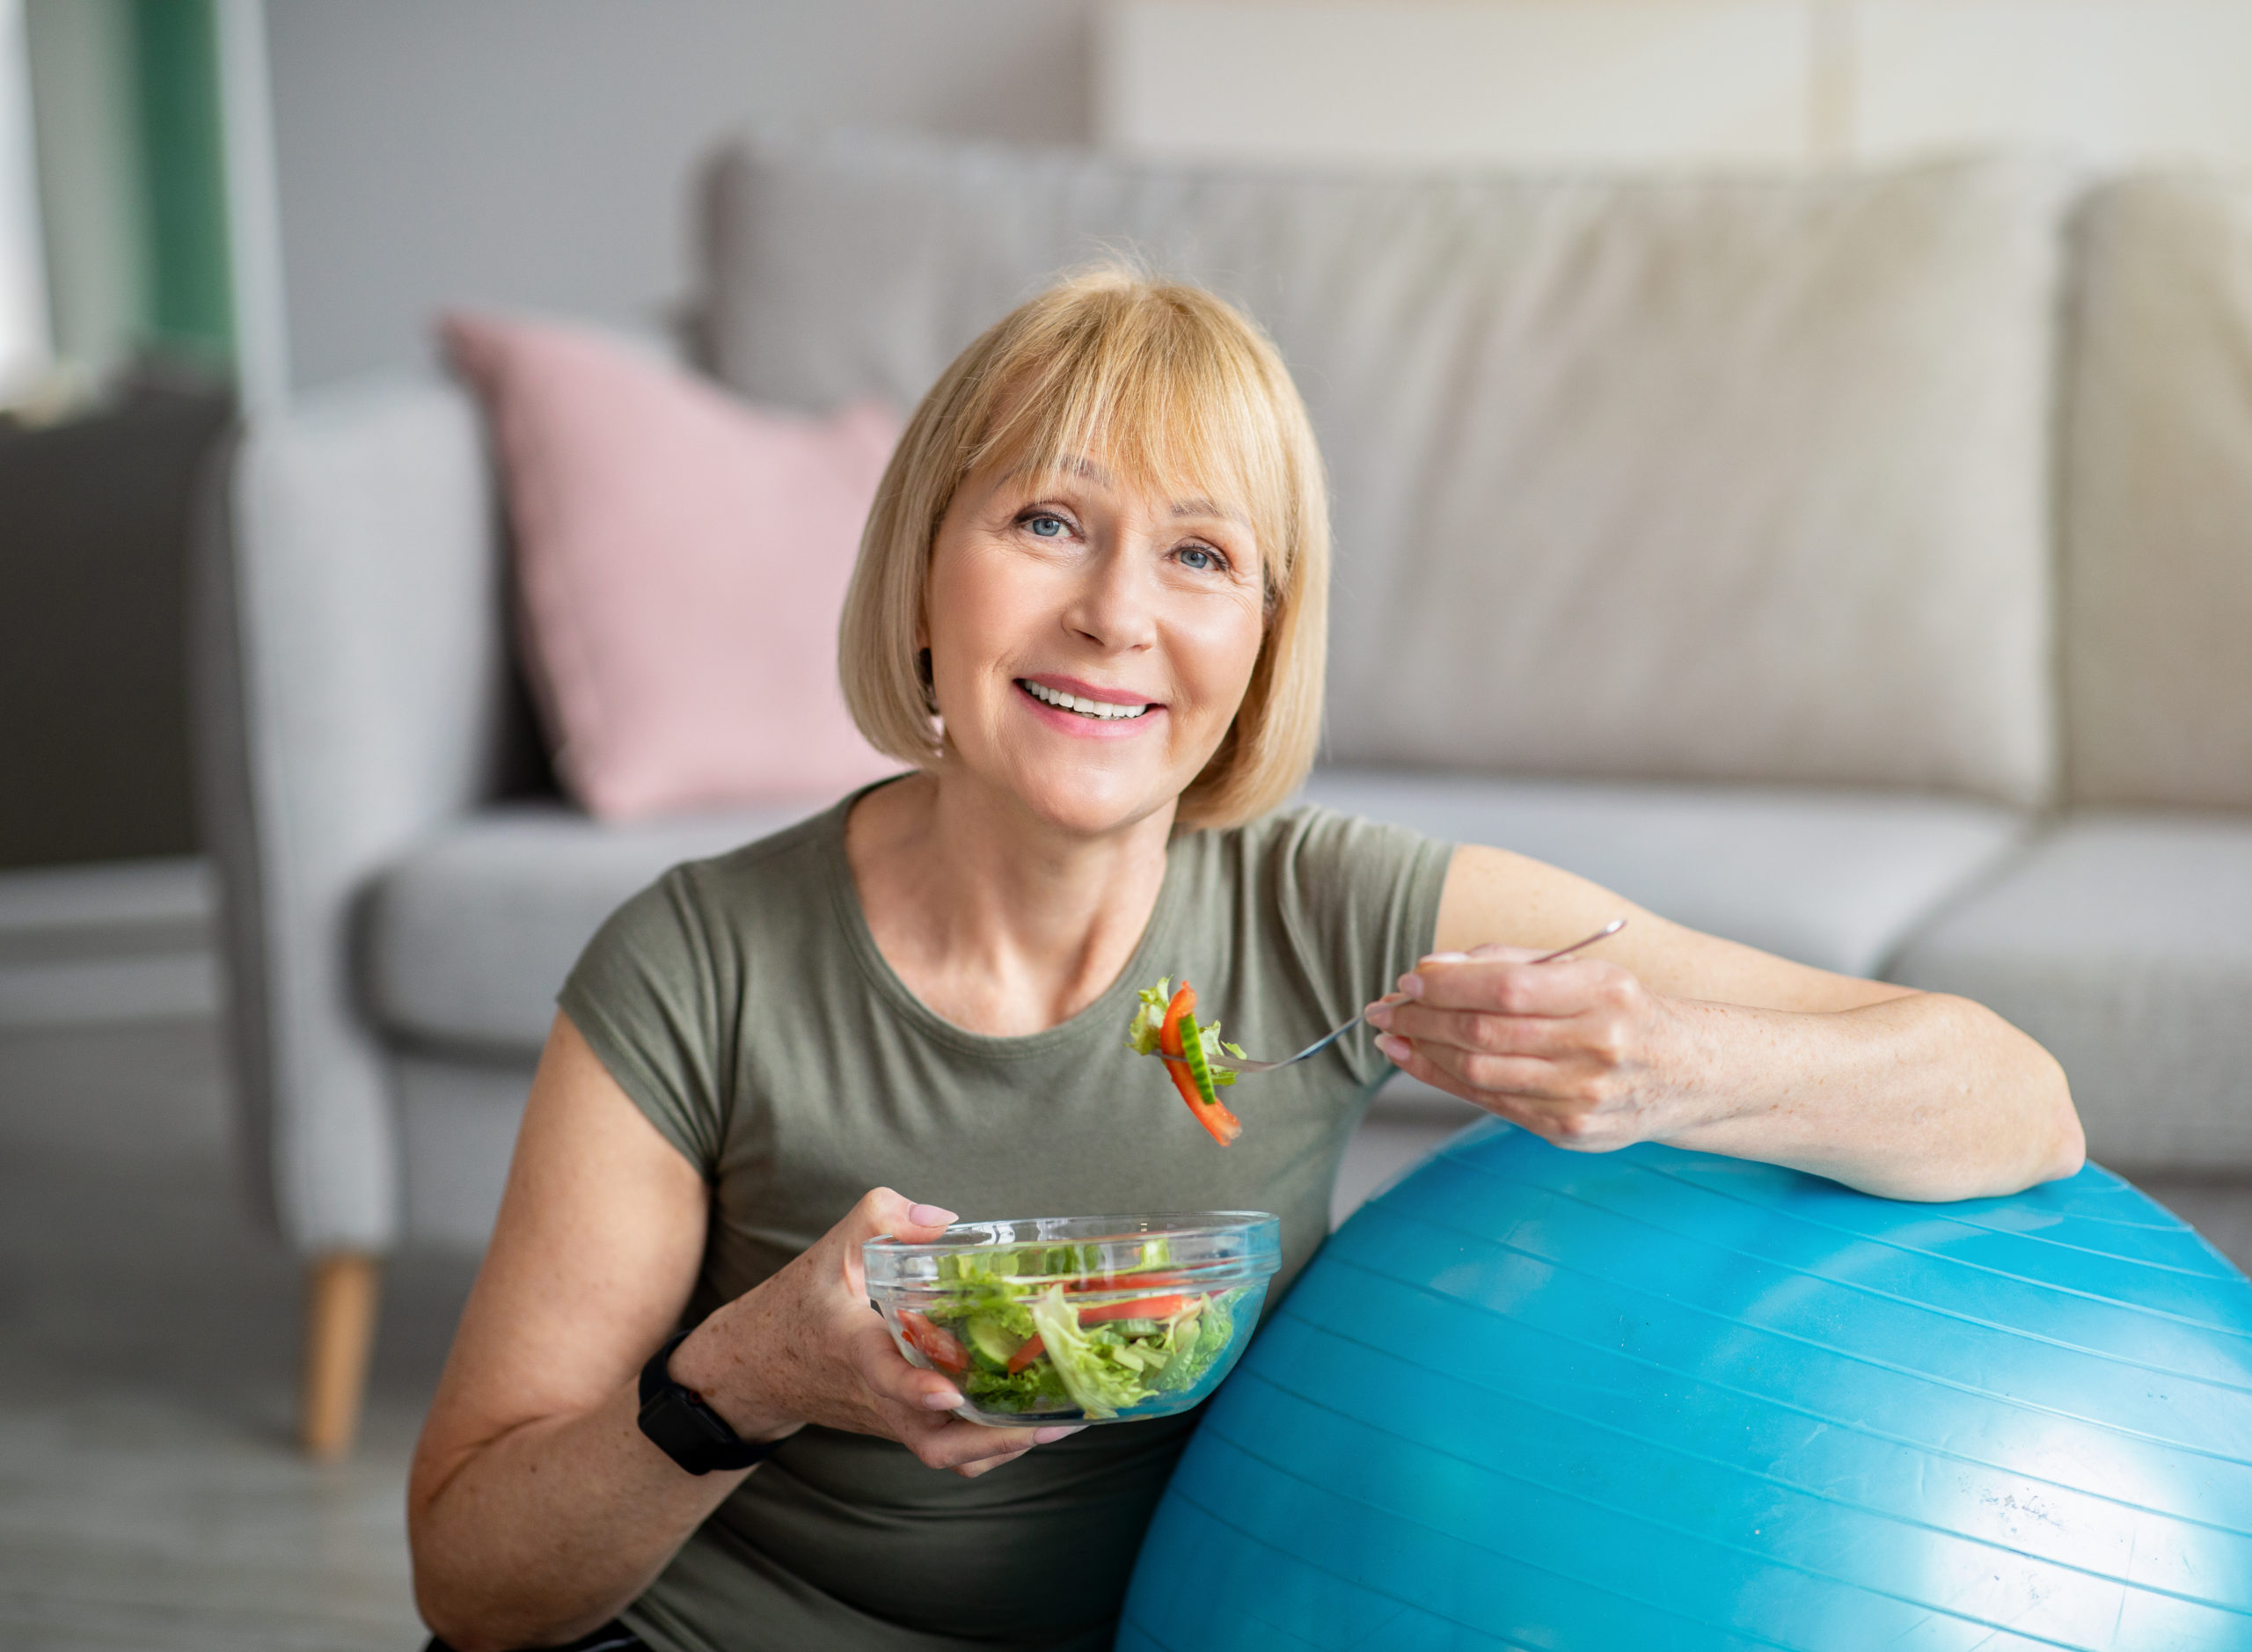  A senior woman eats a salad and smiles while seated next to an exercise ball.